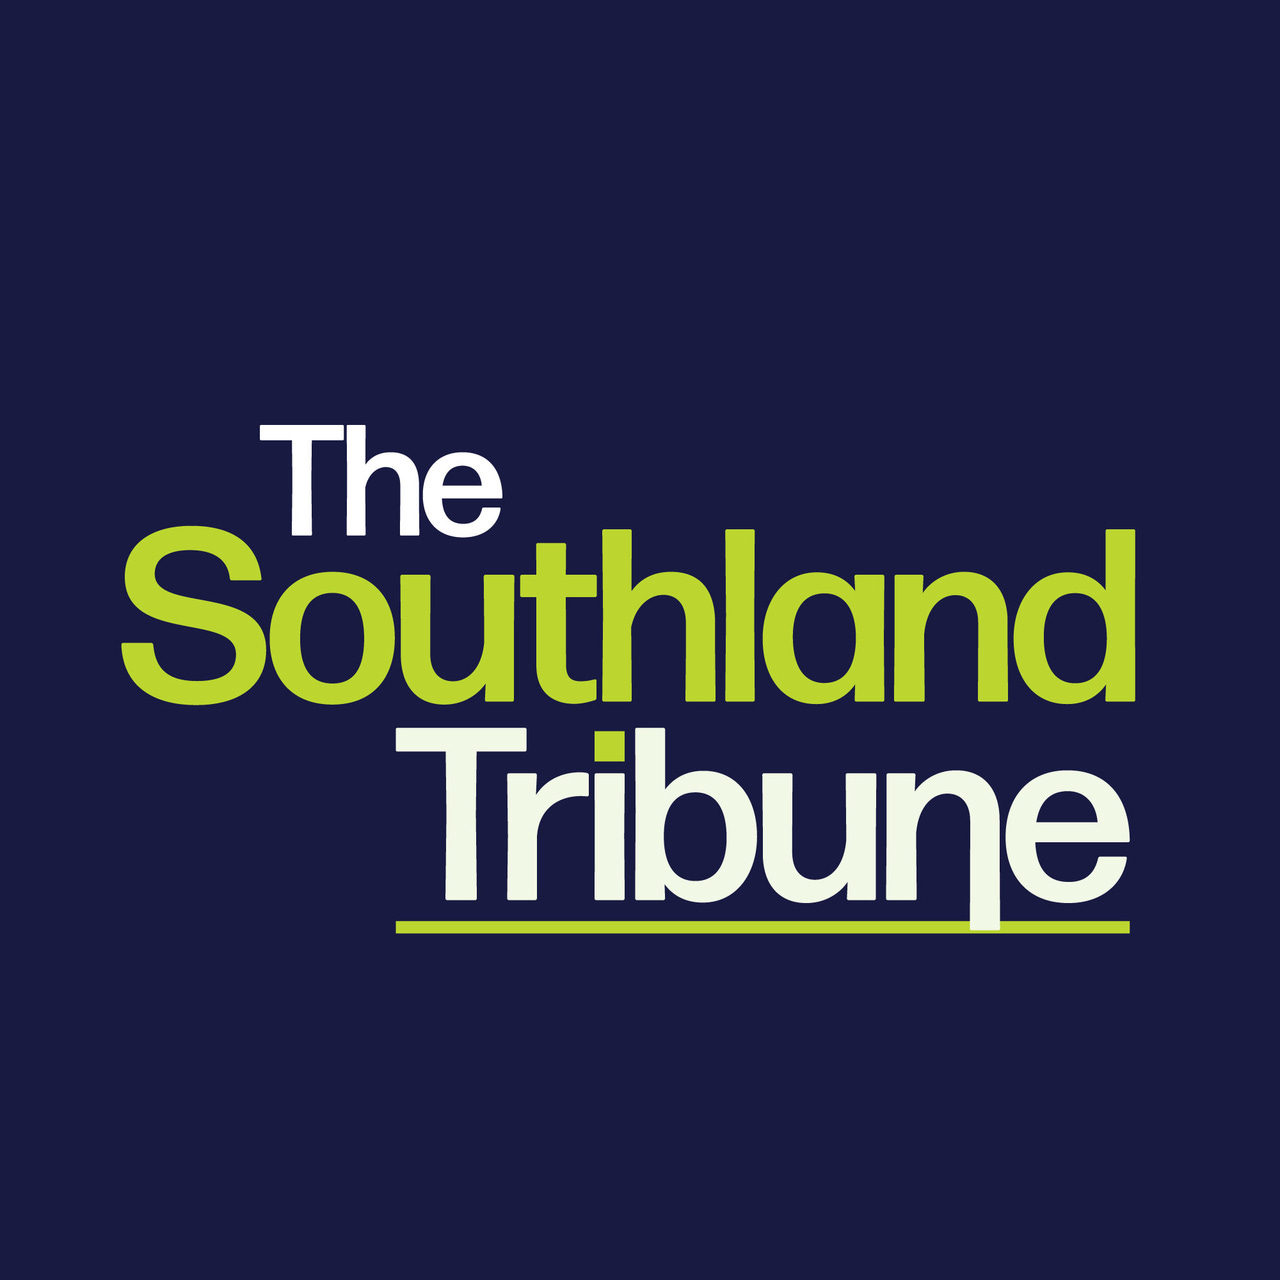 Artwork for The Southland Tribune